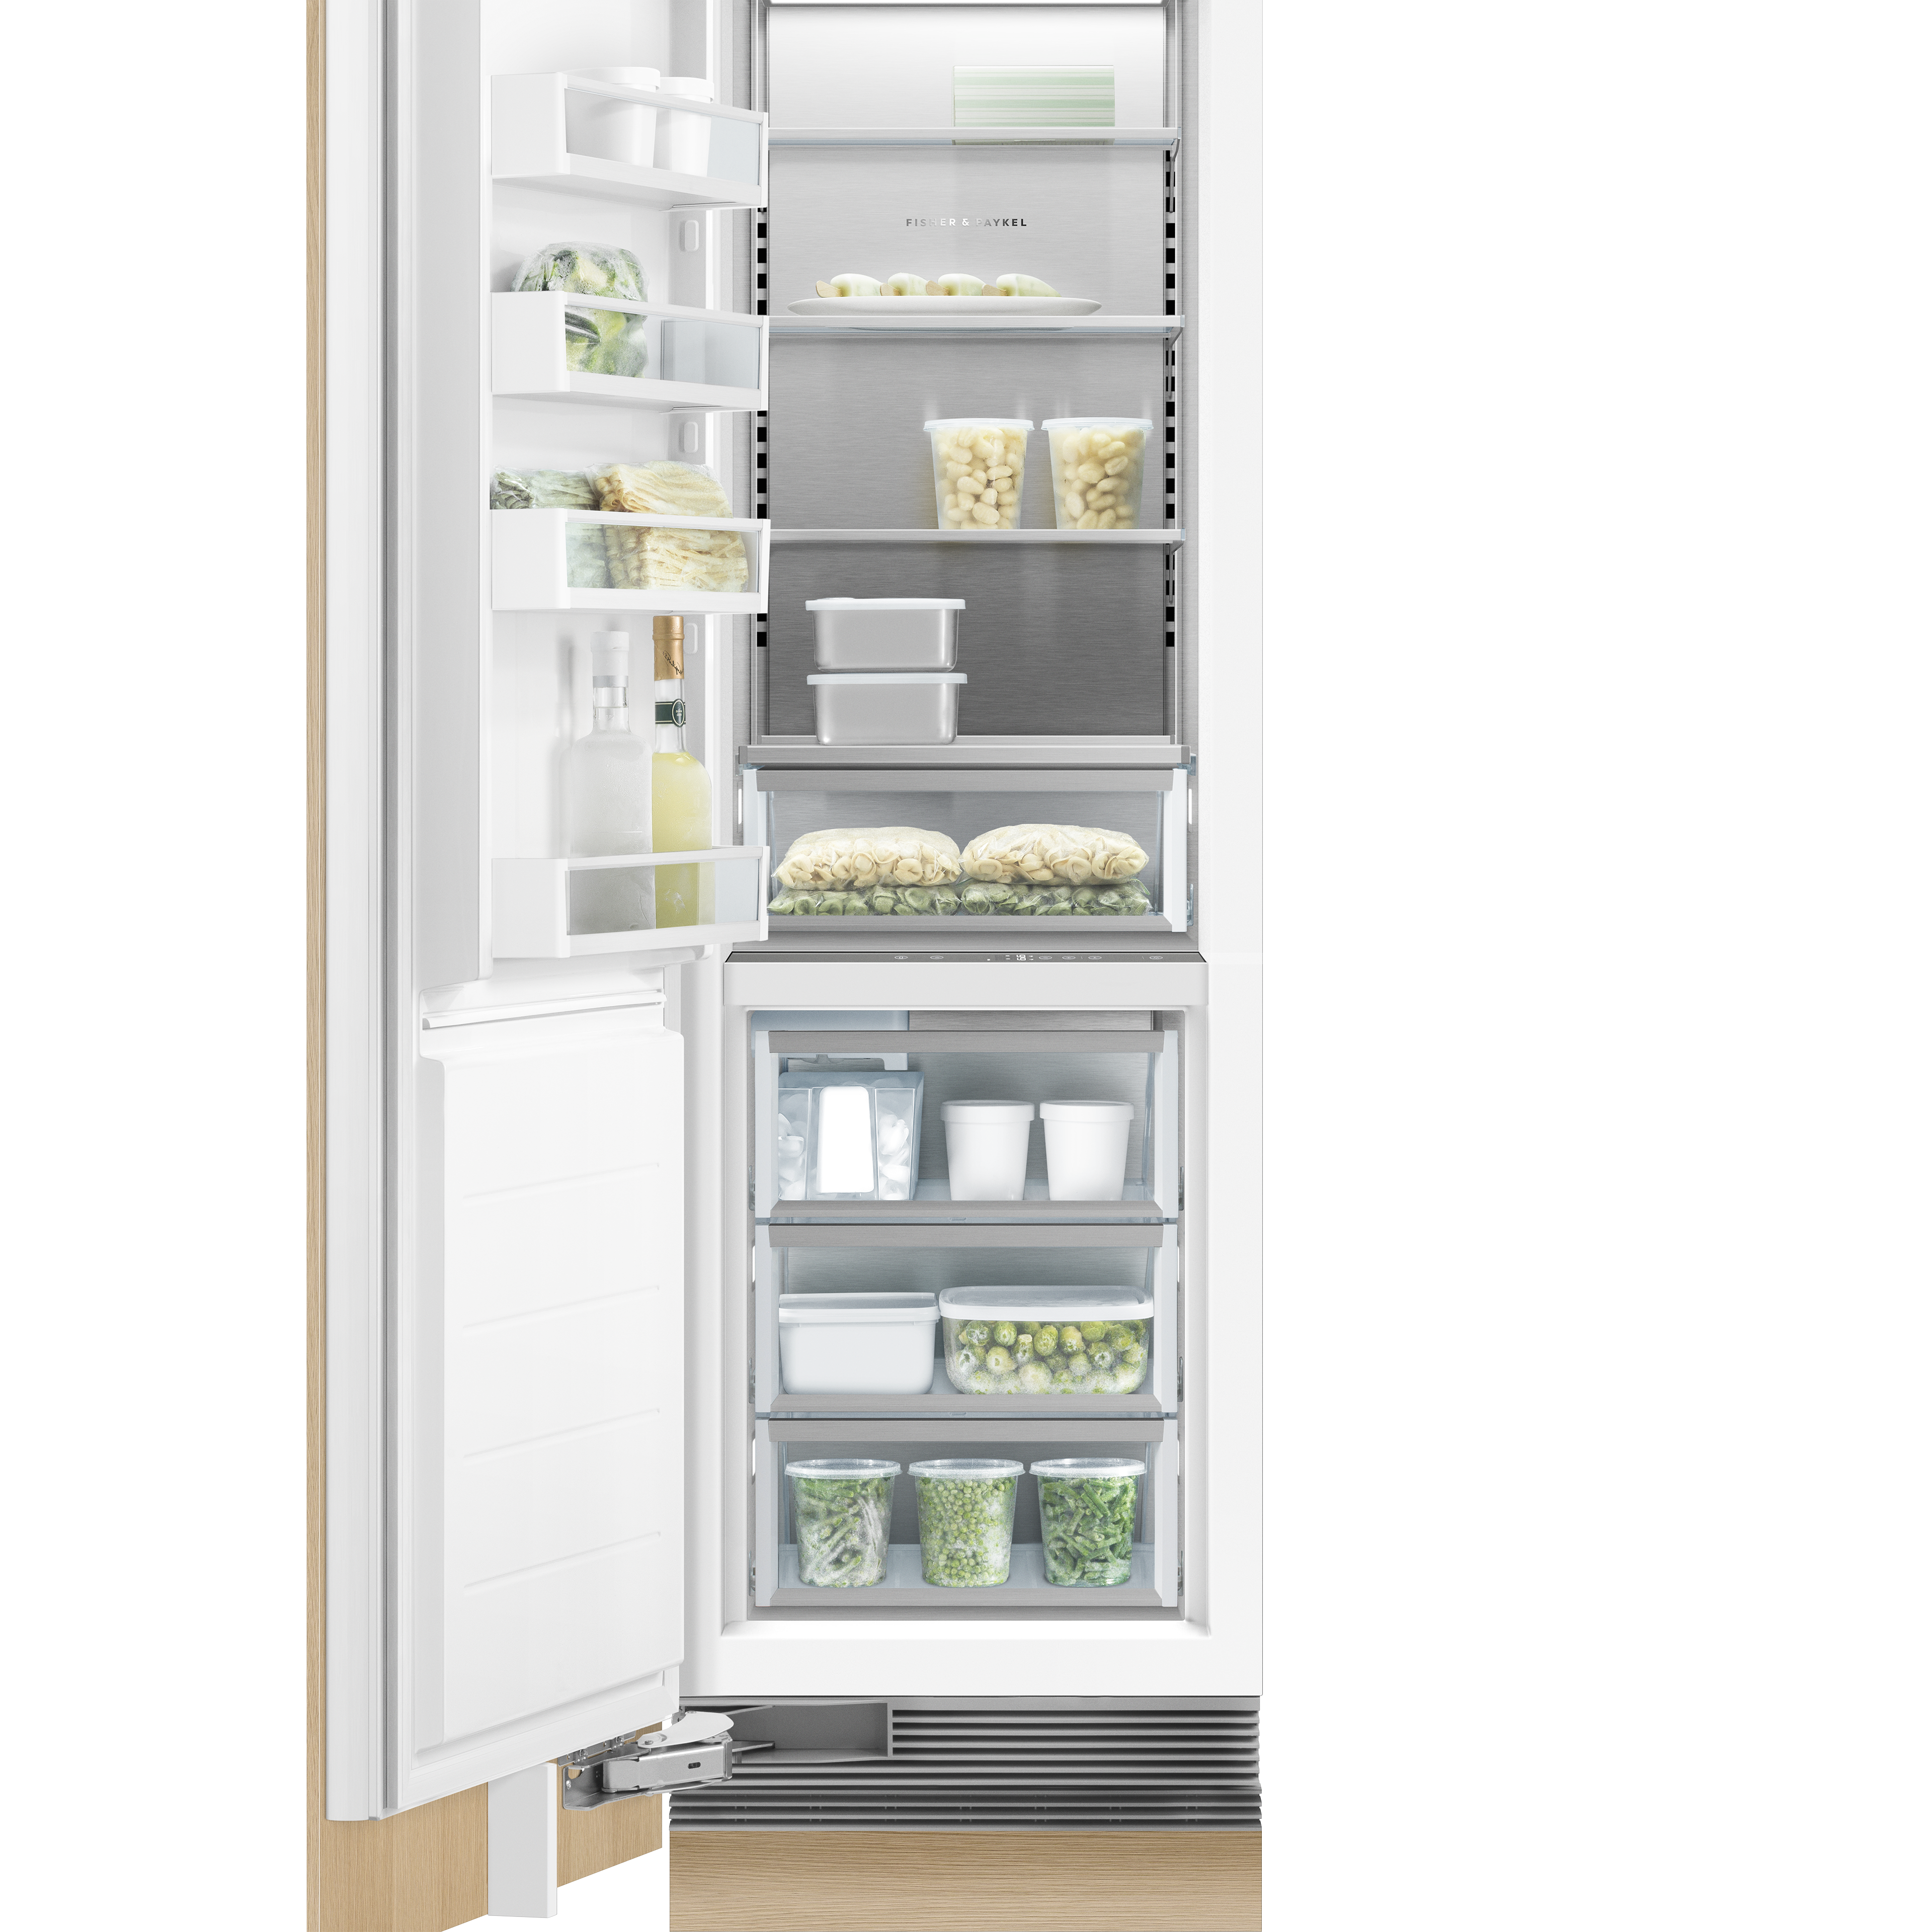 Model: RS2484FLJK1 | Fisher and Paykel Integrated Column Freezer, 24", Ice